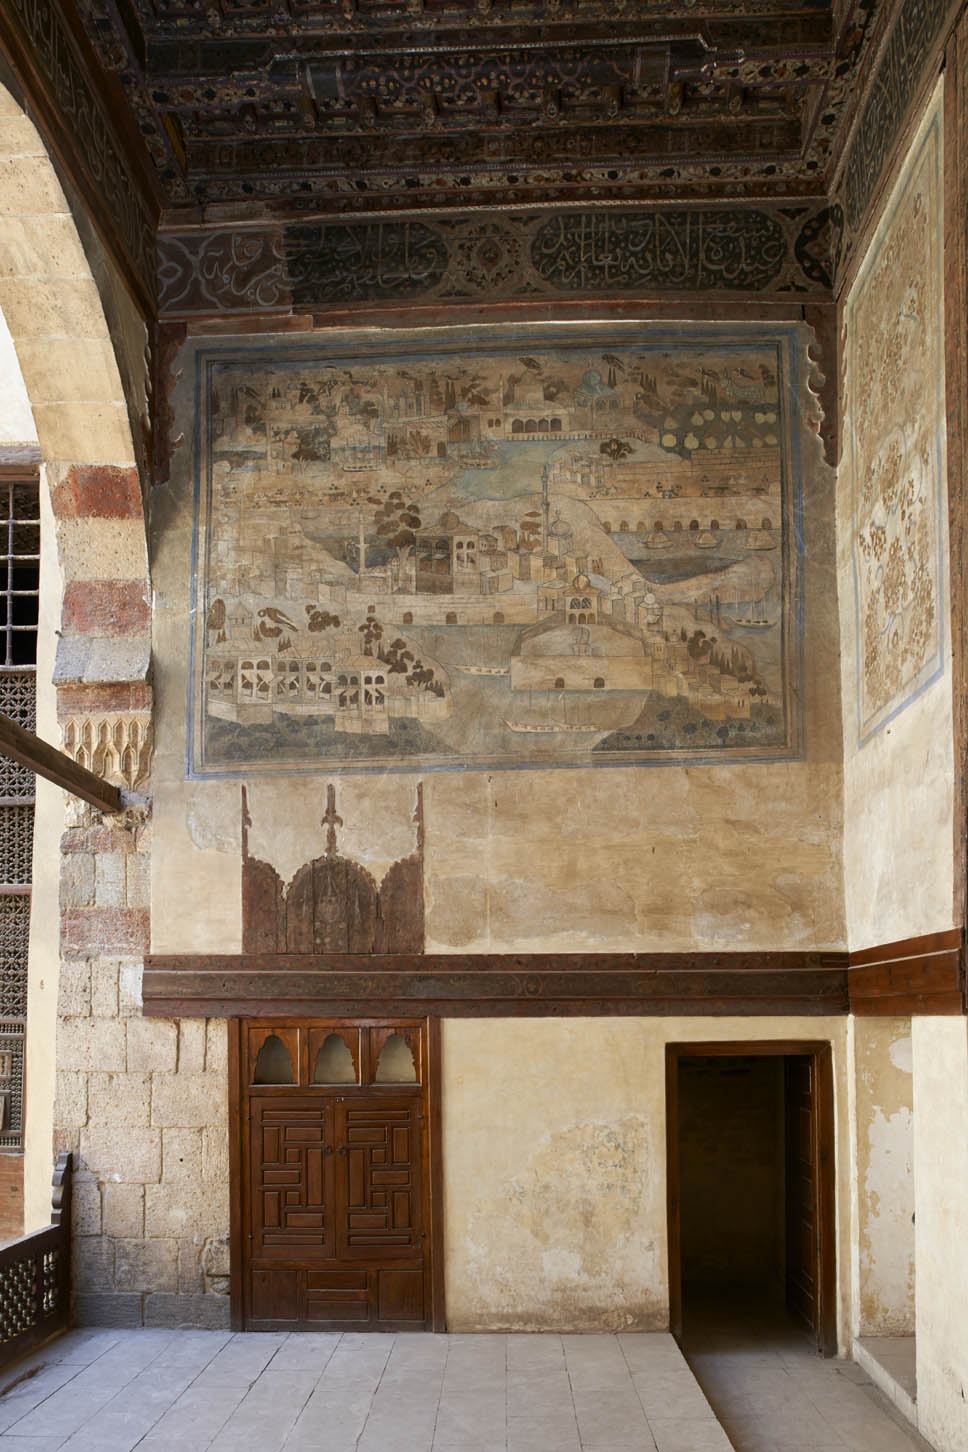 View of frescoes in maq'ad